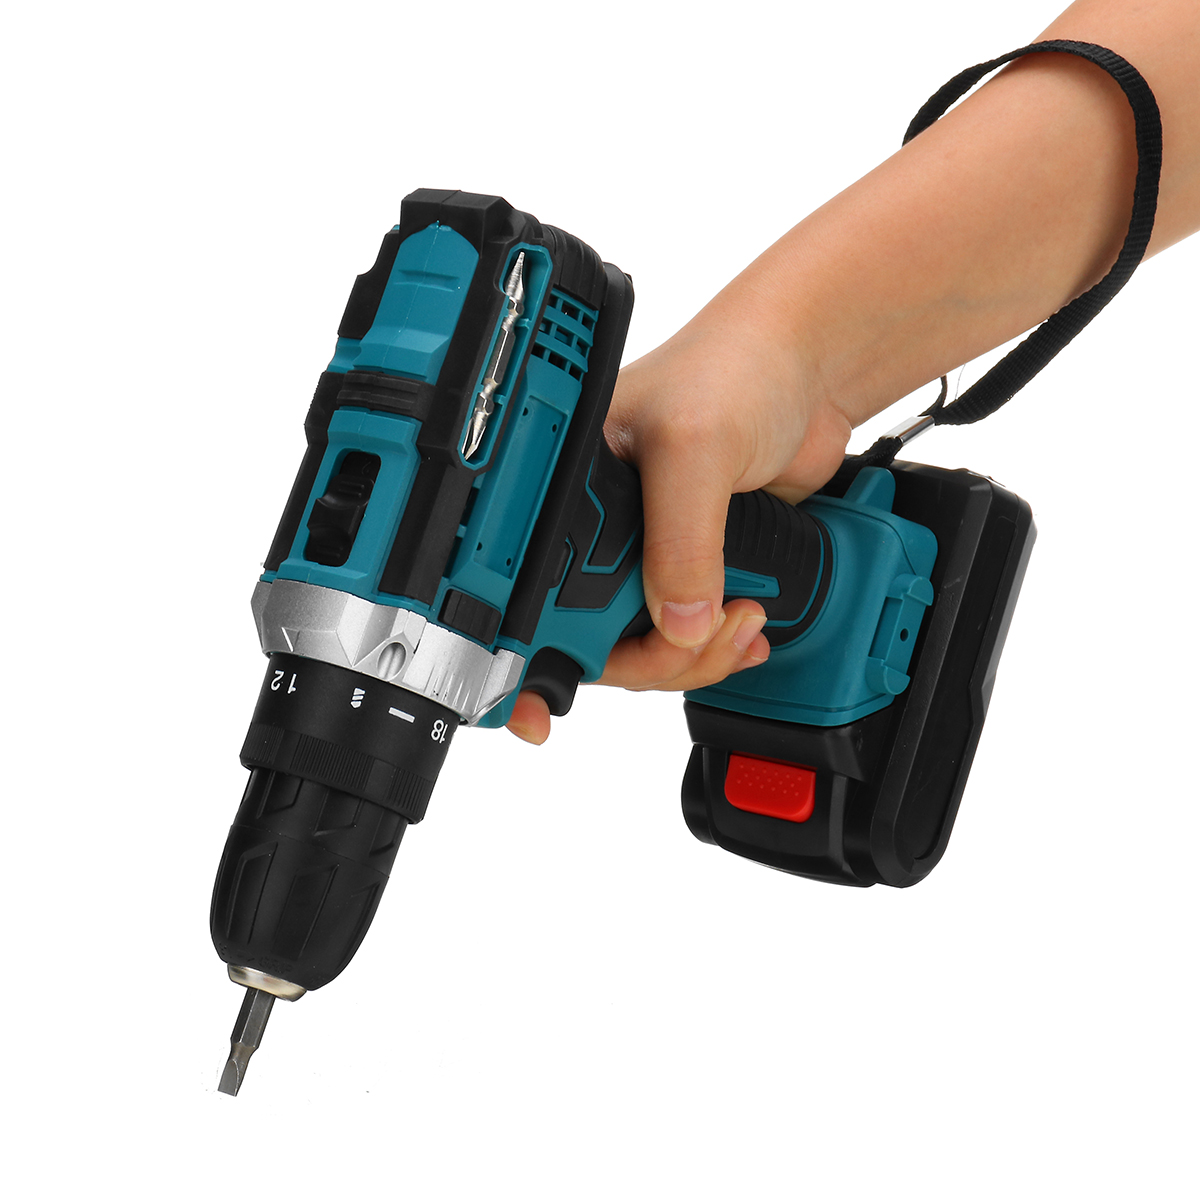 2000rpm-Impact-Drill-Driver-Rechargeable-Electric-Screwdriver-Portable-Wood-Metal-Drilling-Tool-w-1p-1852108-10